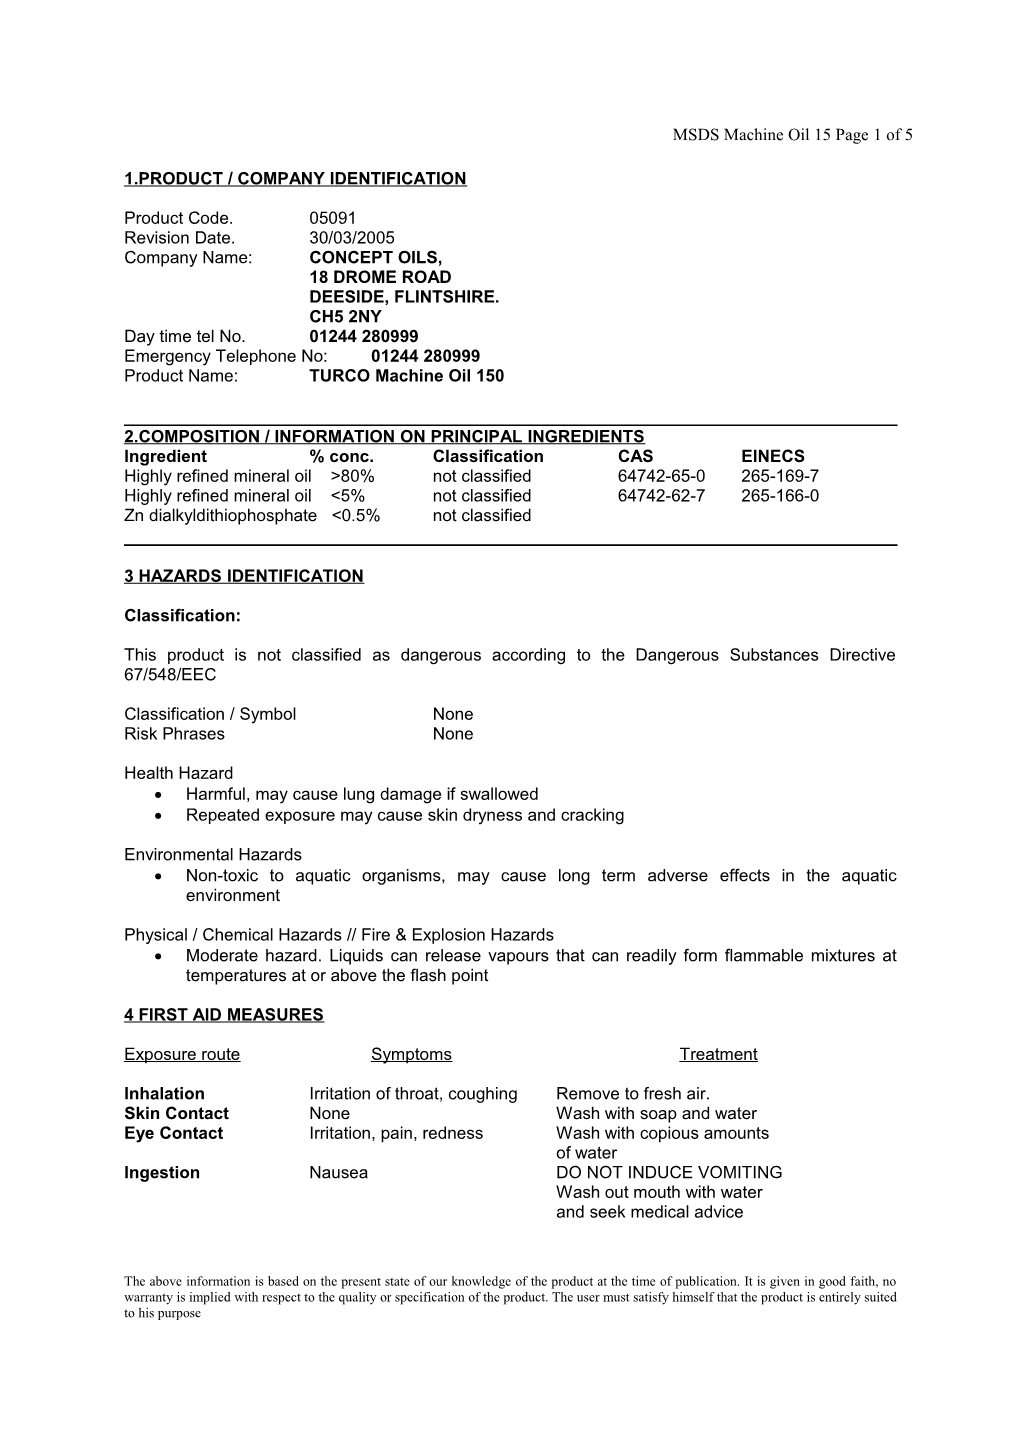 MSDS Machine Oil 15 Page 1 of 5